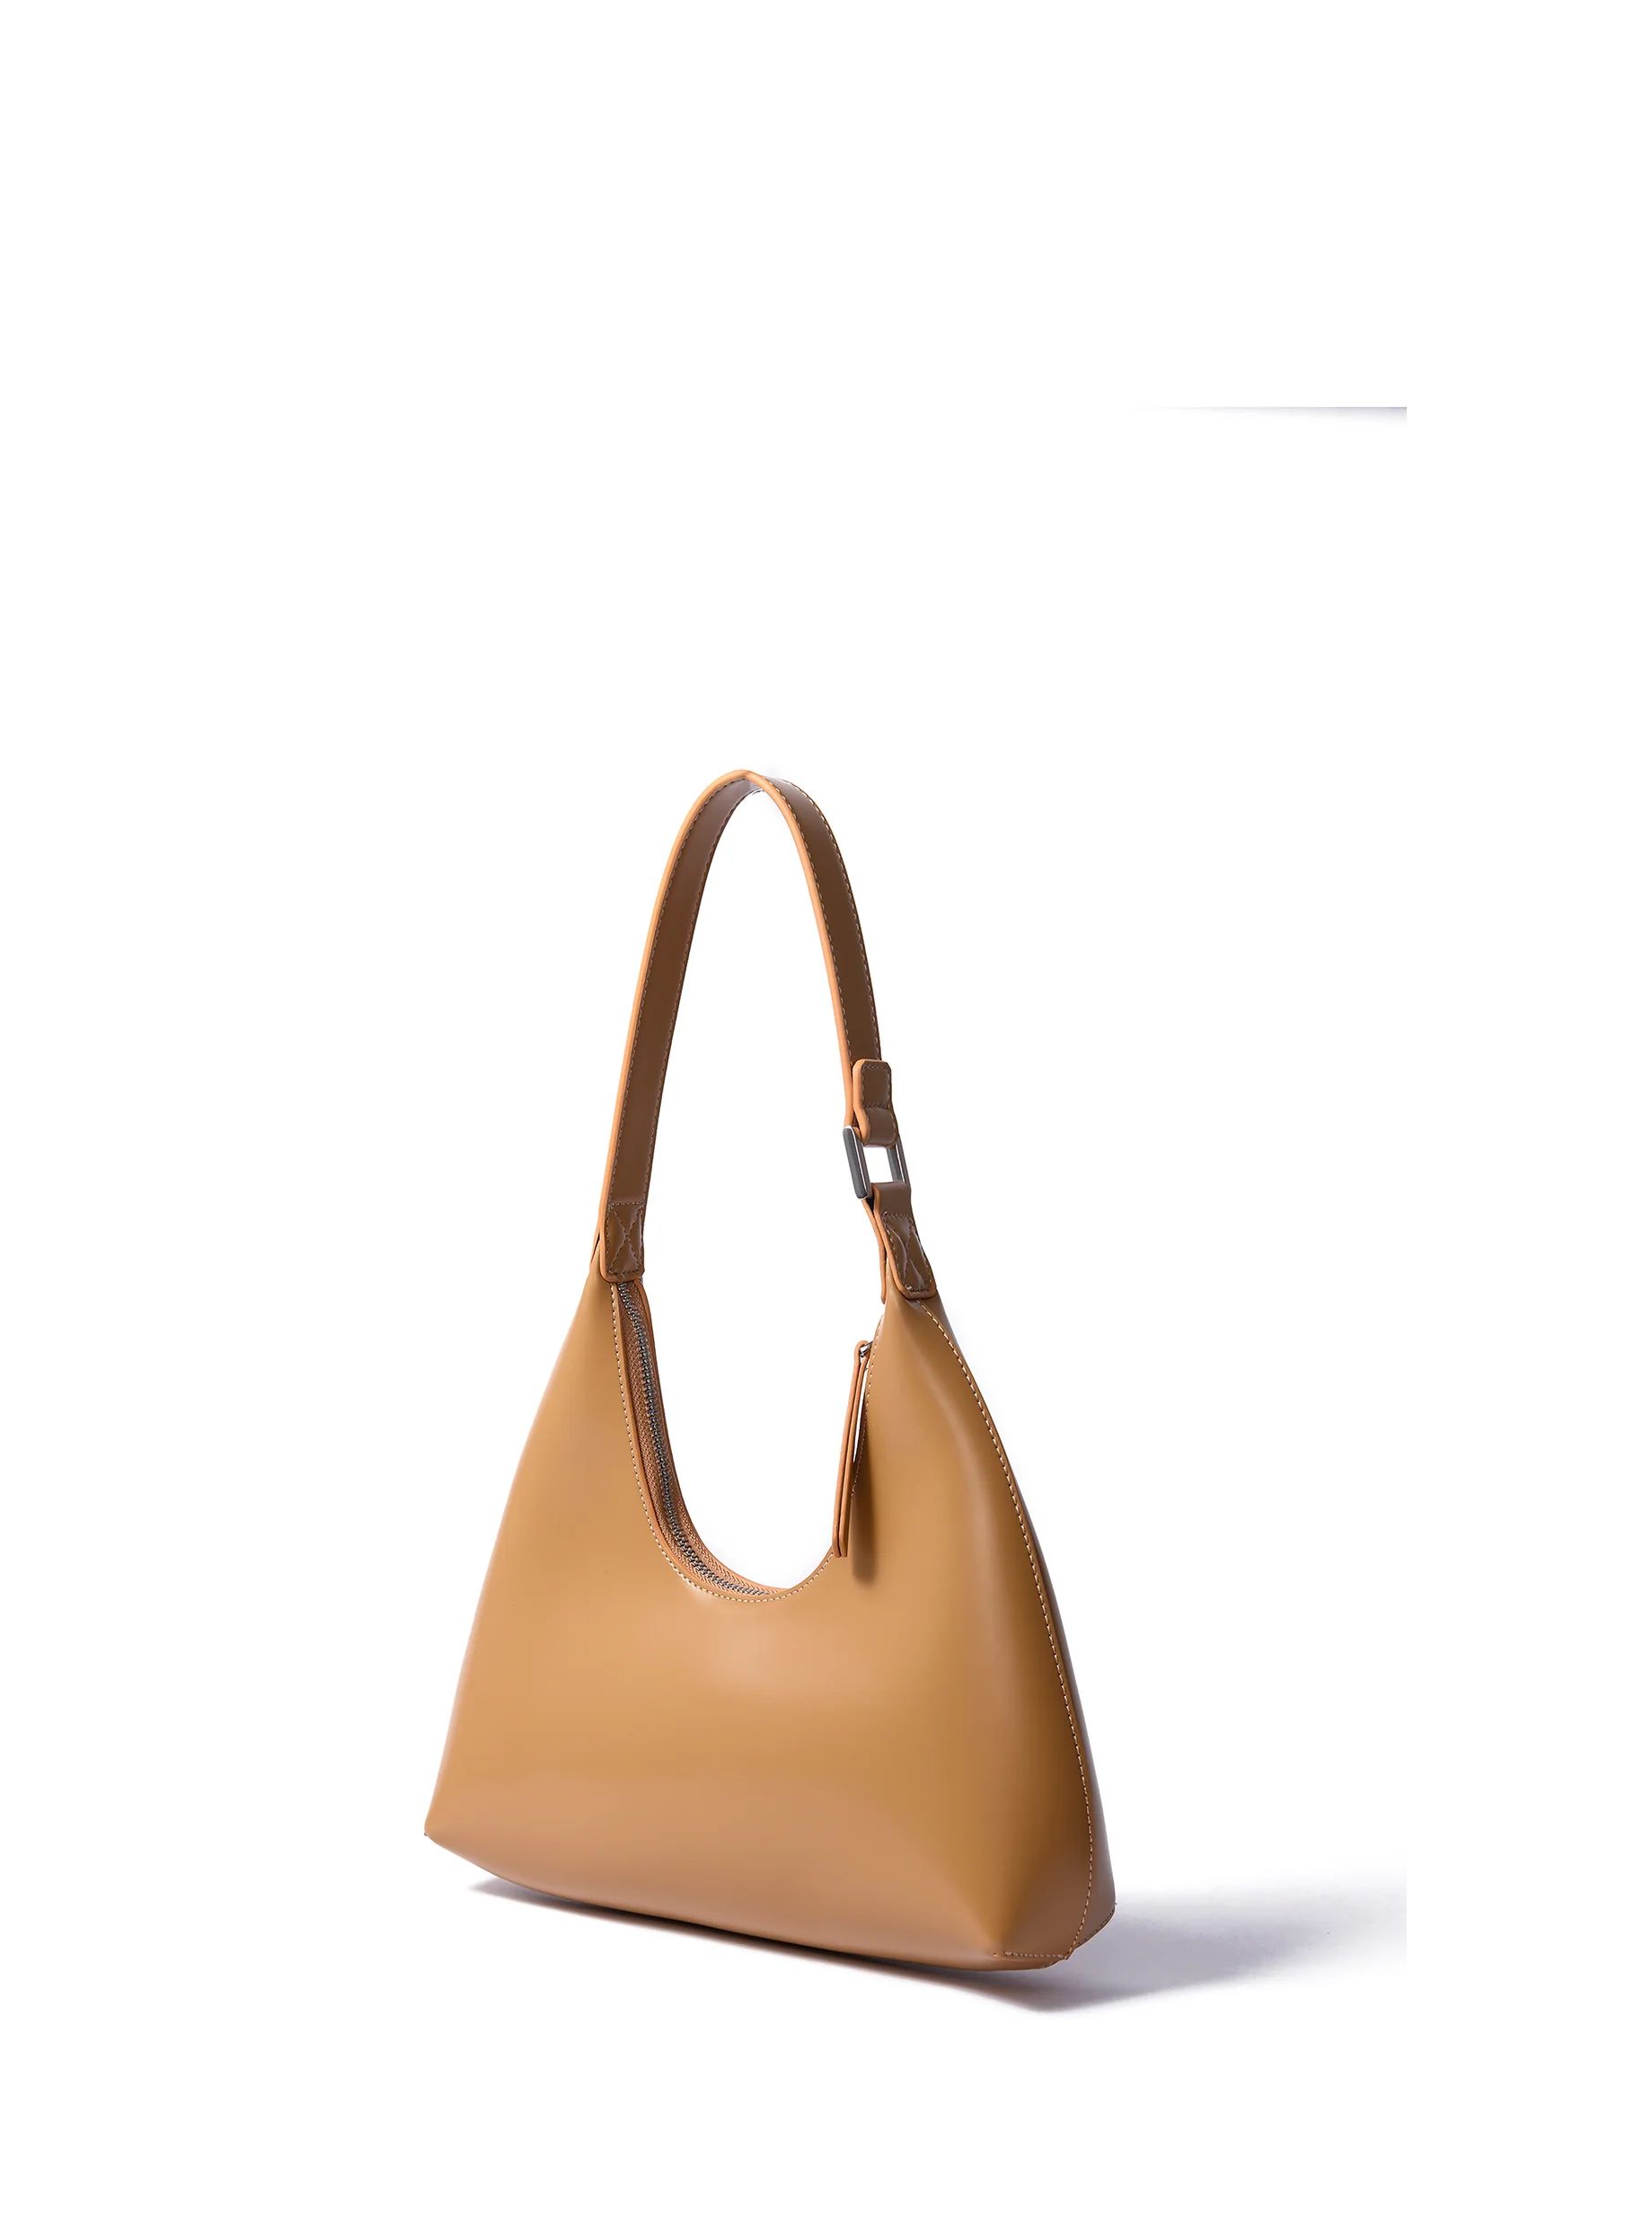 Alexia Bag in Smooth Leather, Yellow | Bob Ore Blue Collection